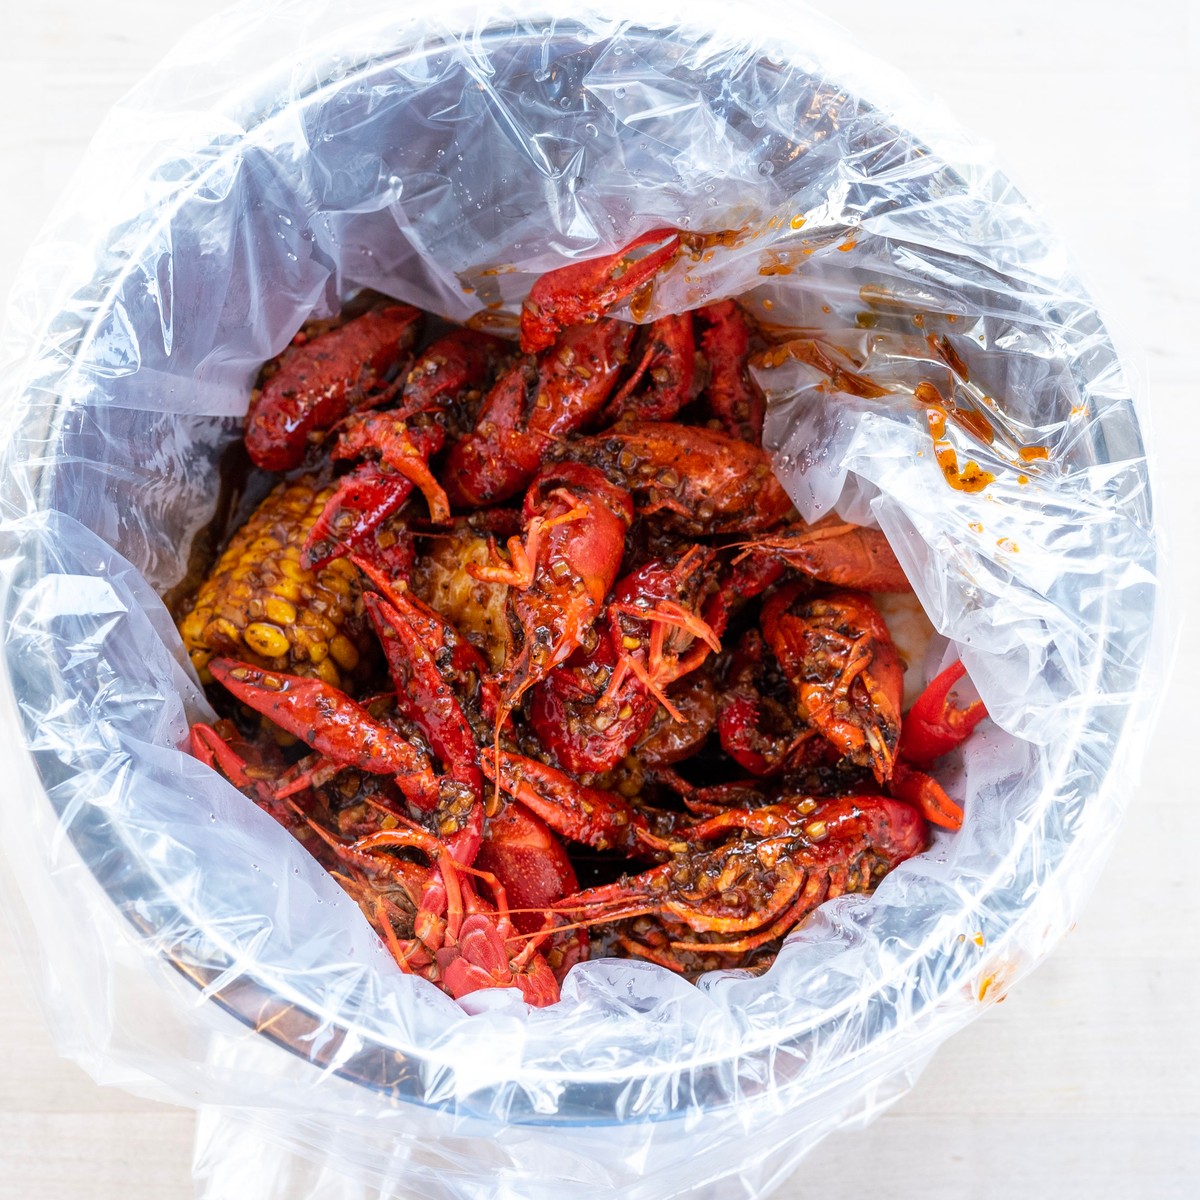 The Sauce Boiling Seafood Express makes quick-service bagged